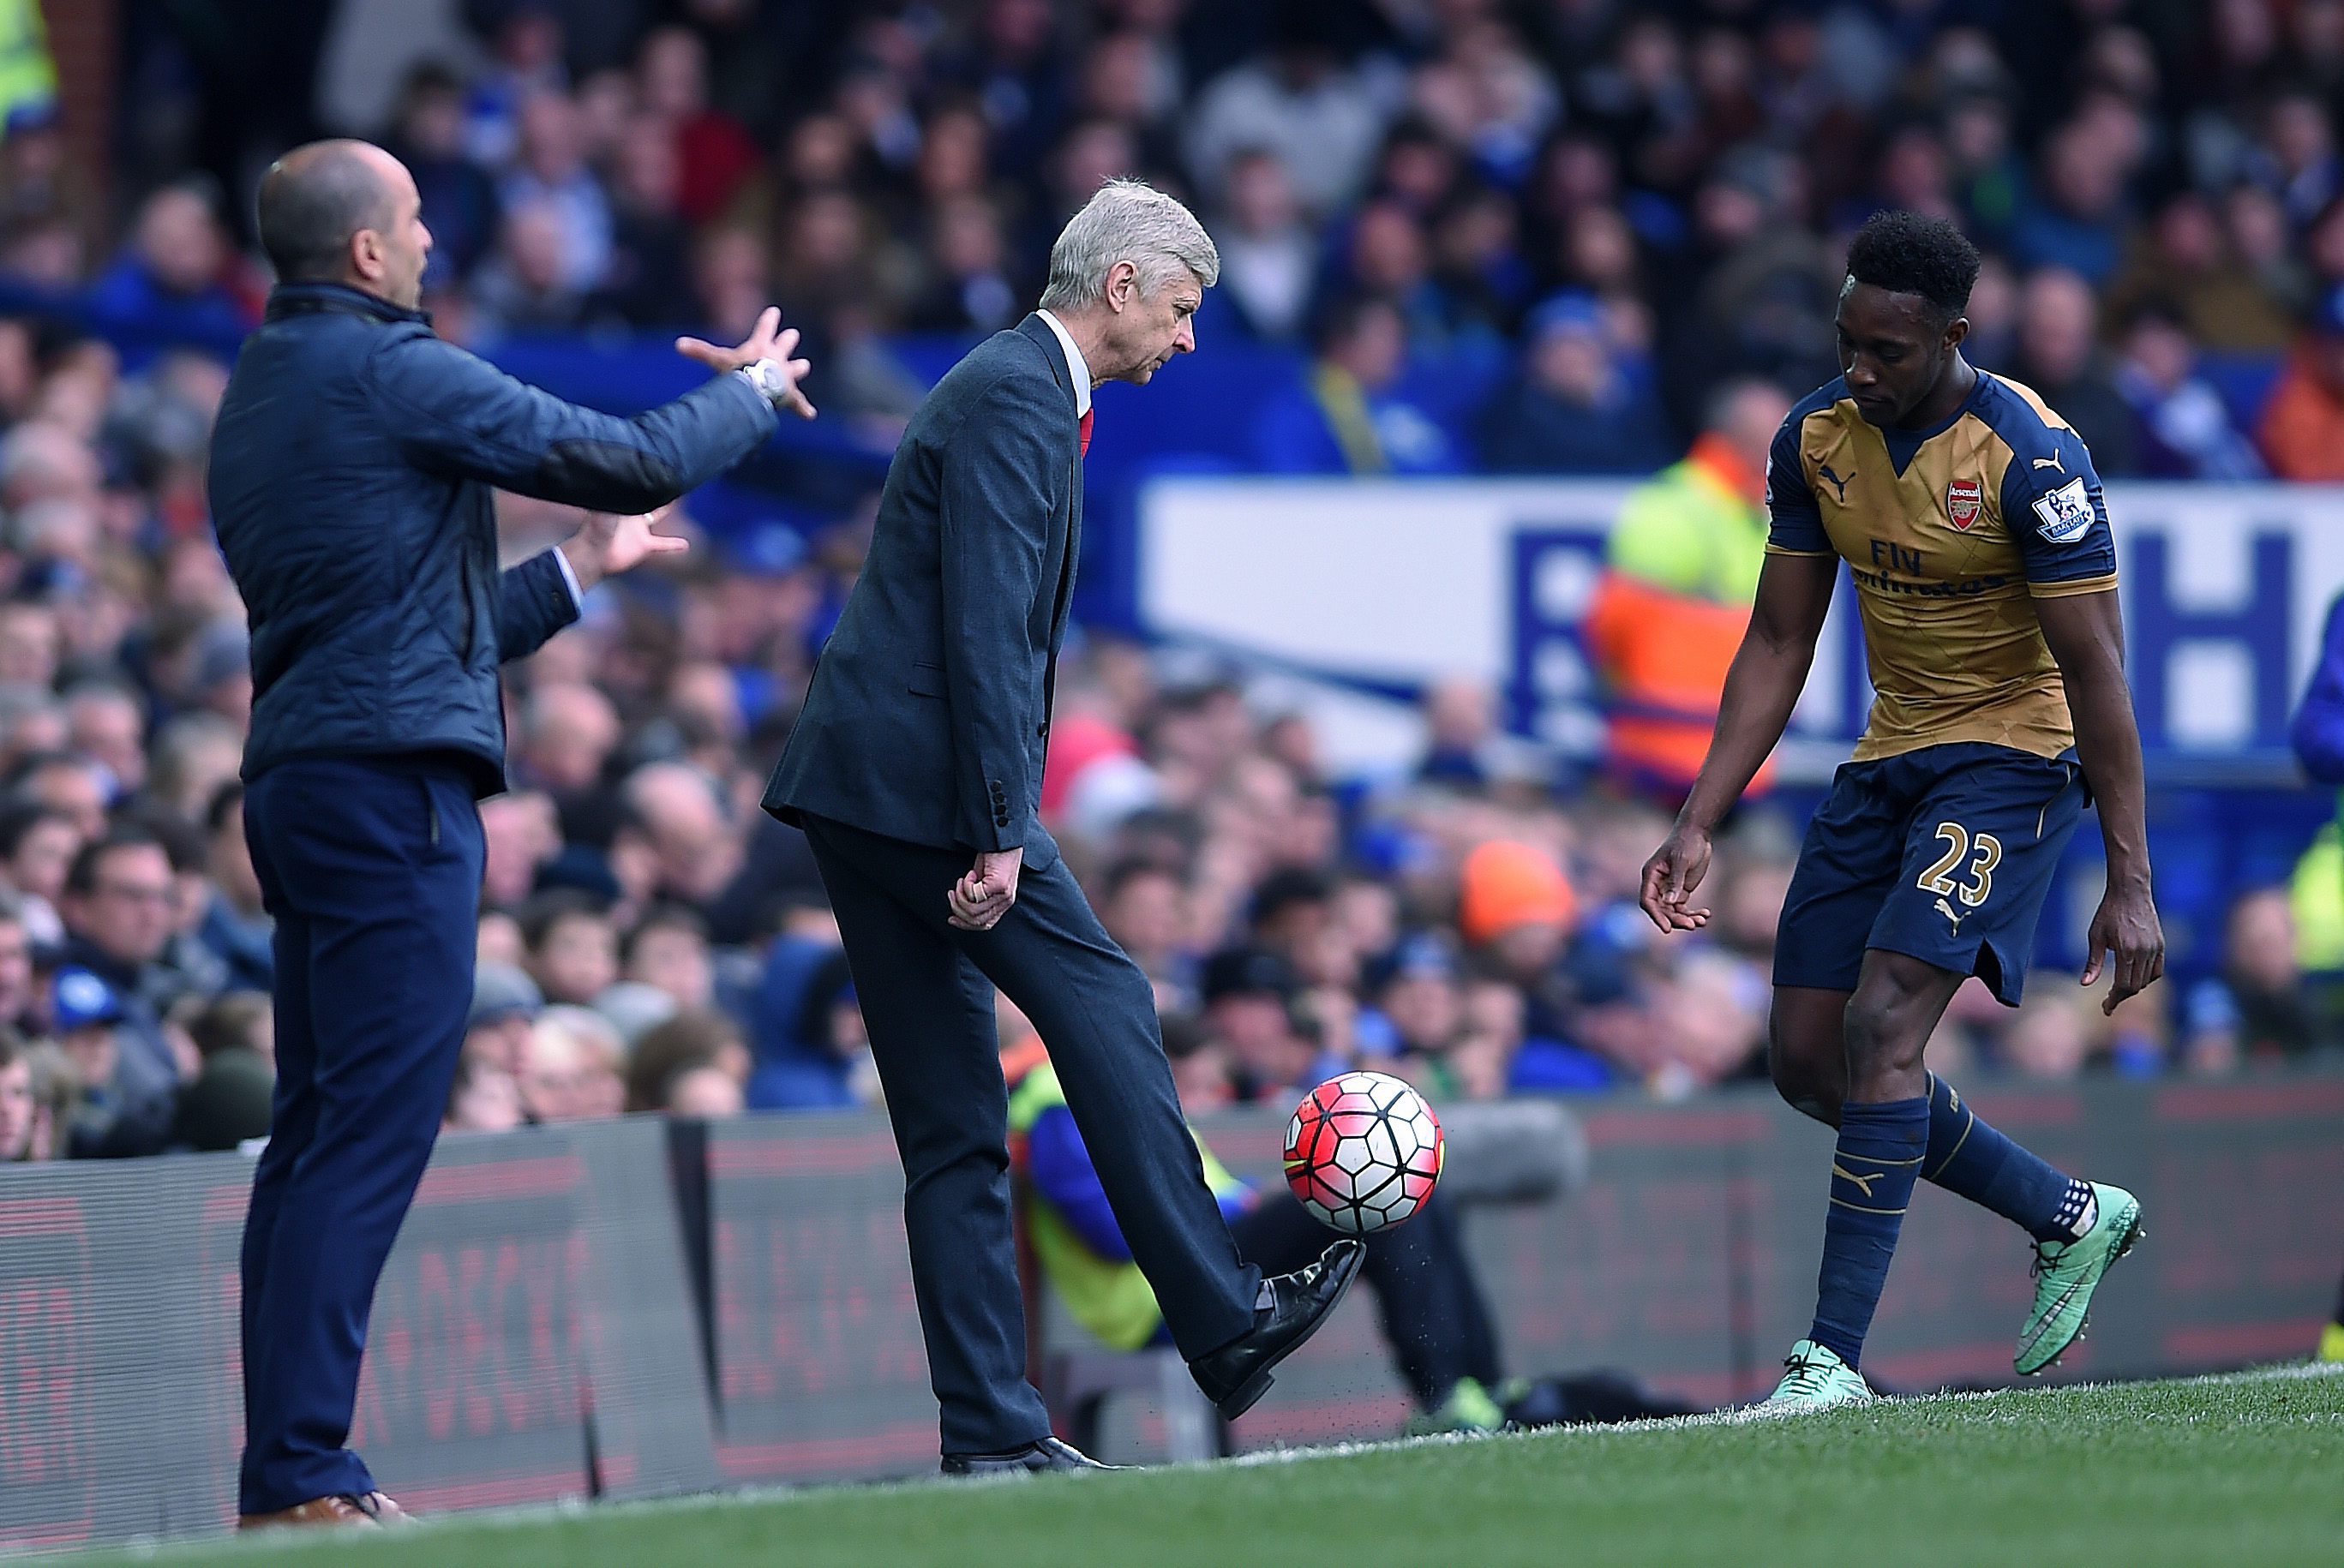 Arsenal manager Arsene Wenger (L) chips the ball to Danny Welbeck (R) during the English Premier League soccer match between Everton and Arsenal at the Goodison park, Liverpool, Britain, 19 March 2016.  (Photo by Peter Powell/EPA)